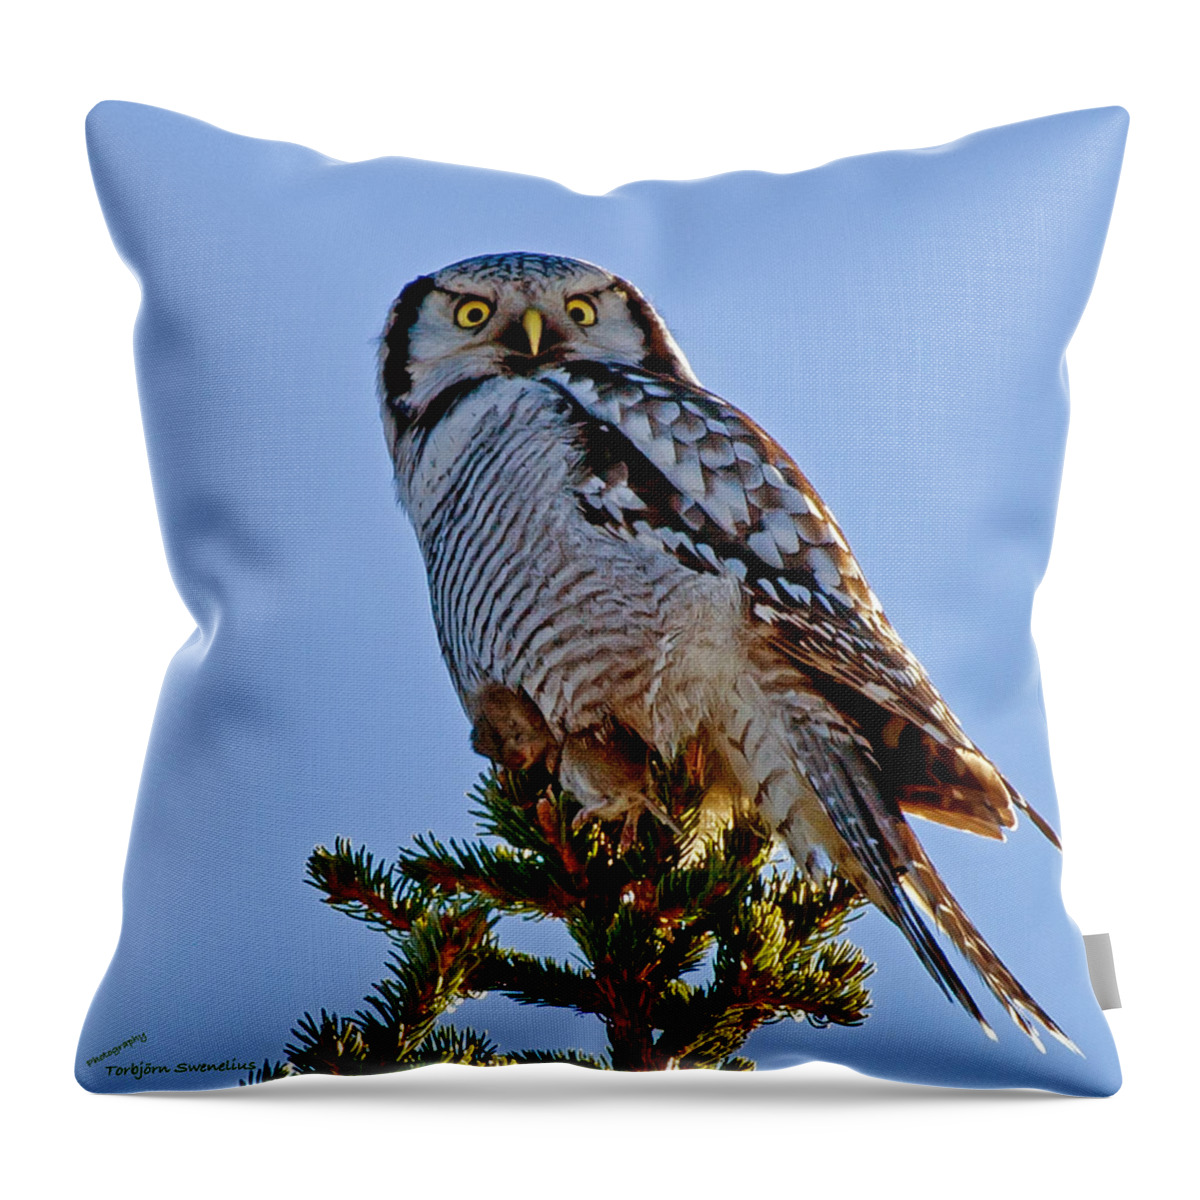 Hawk Owl Square Throw Pillow featuring the photograph Hawk Owl square by Torbjorn Swenelius